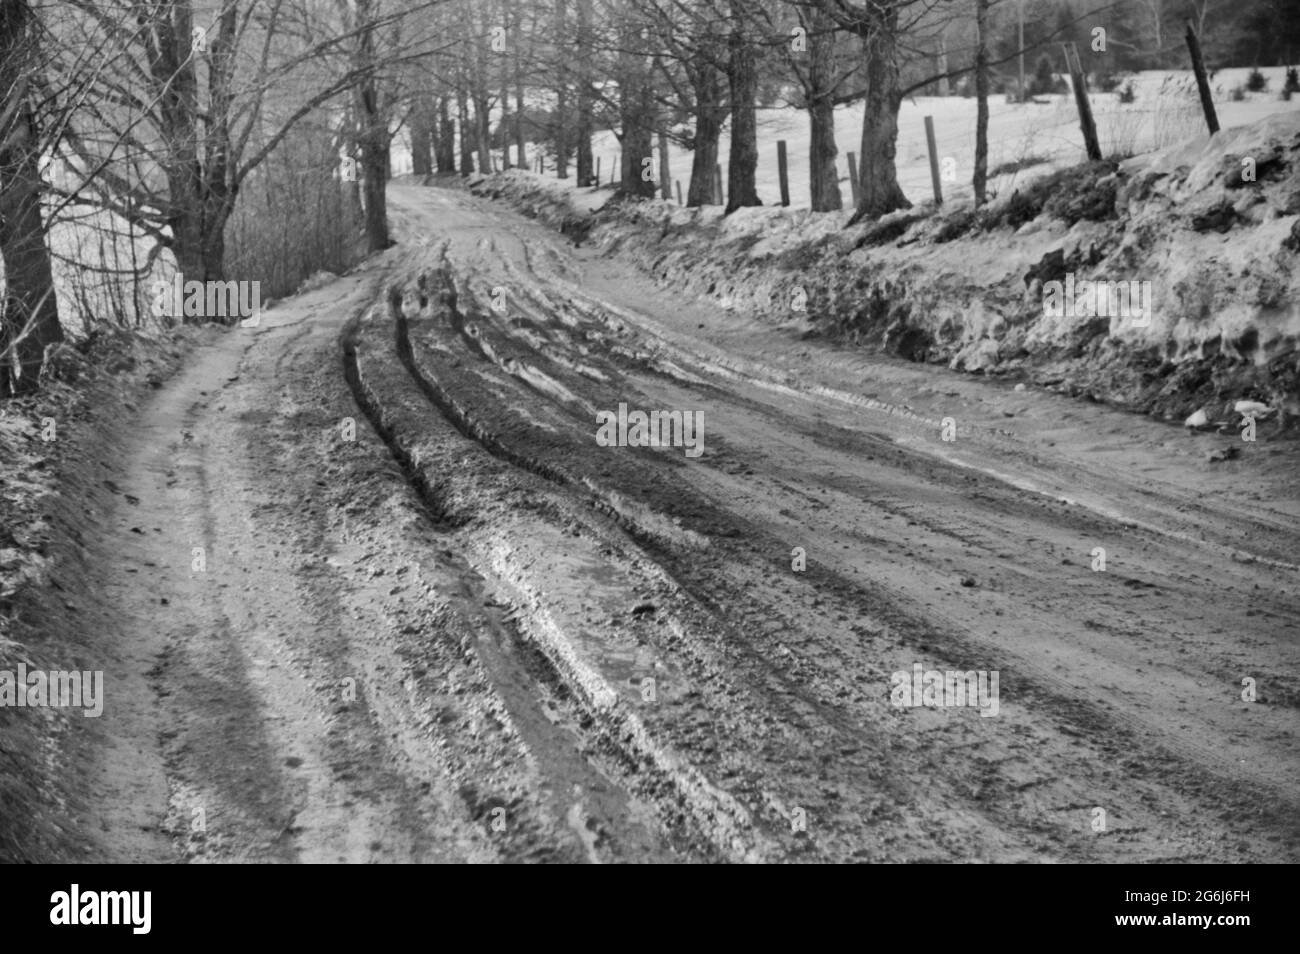 Muddy road after thaw, near Stowe, Vermont, circa 1940 Stock Photo